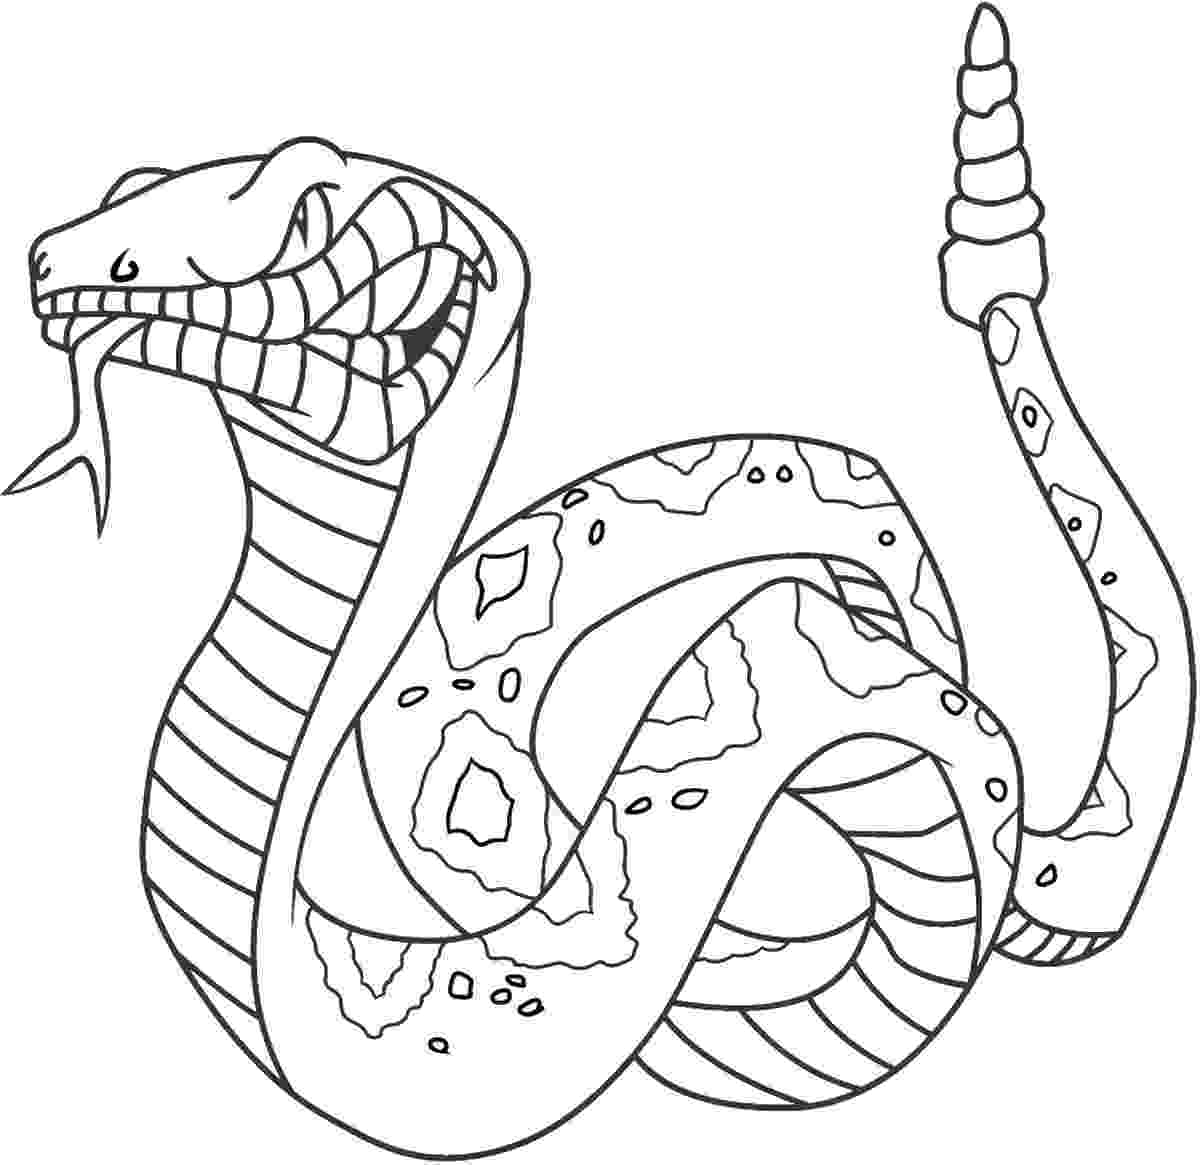 coloring book snake snake coloring pages free for children book snake coloring 